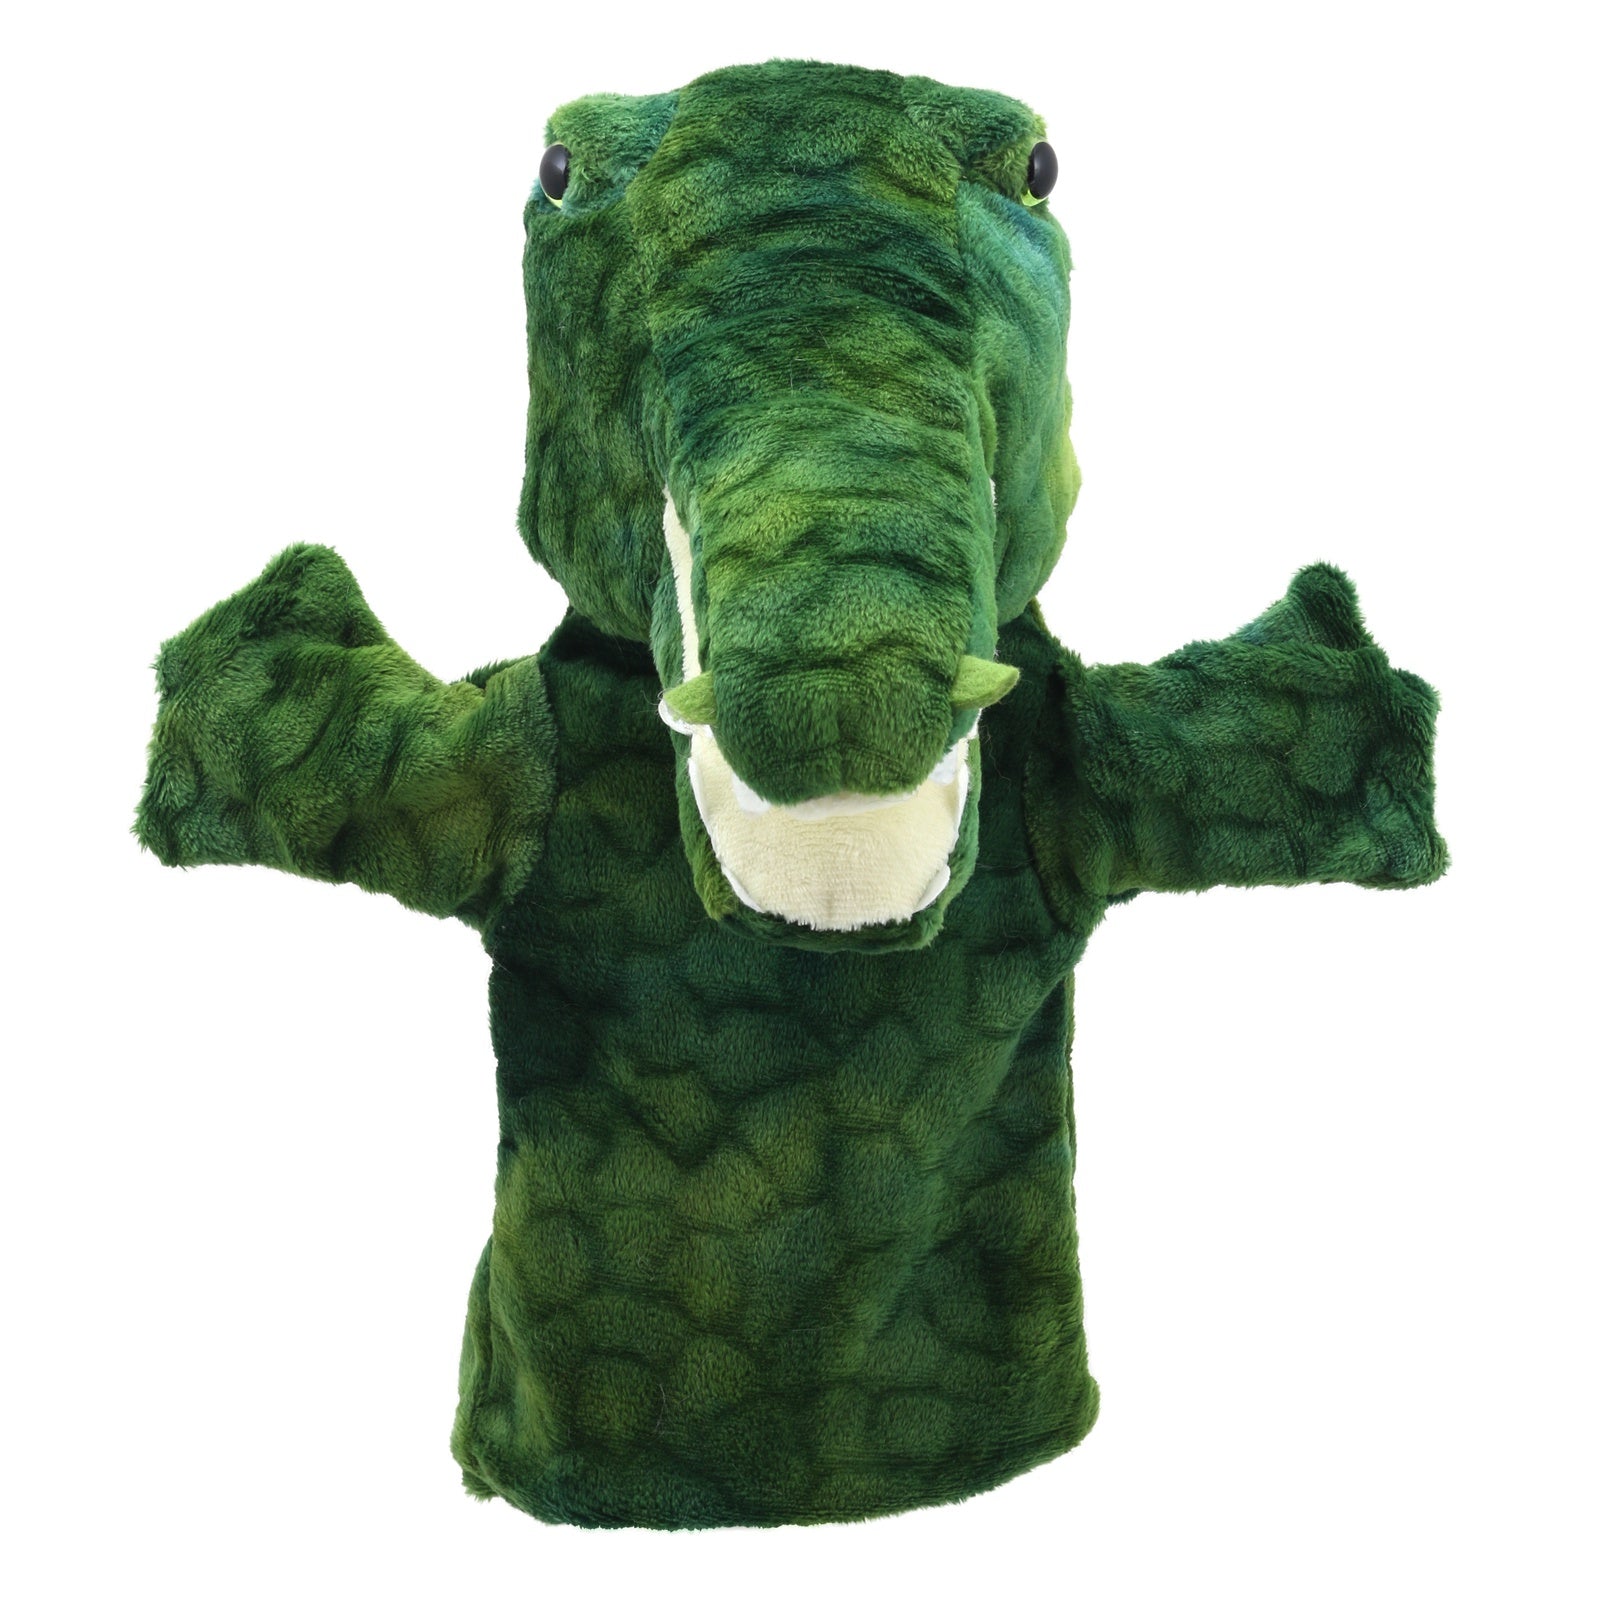 The Puppet Company - Hand Puppet - Crocodile